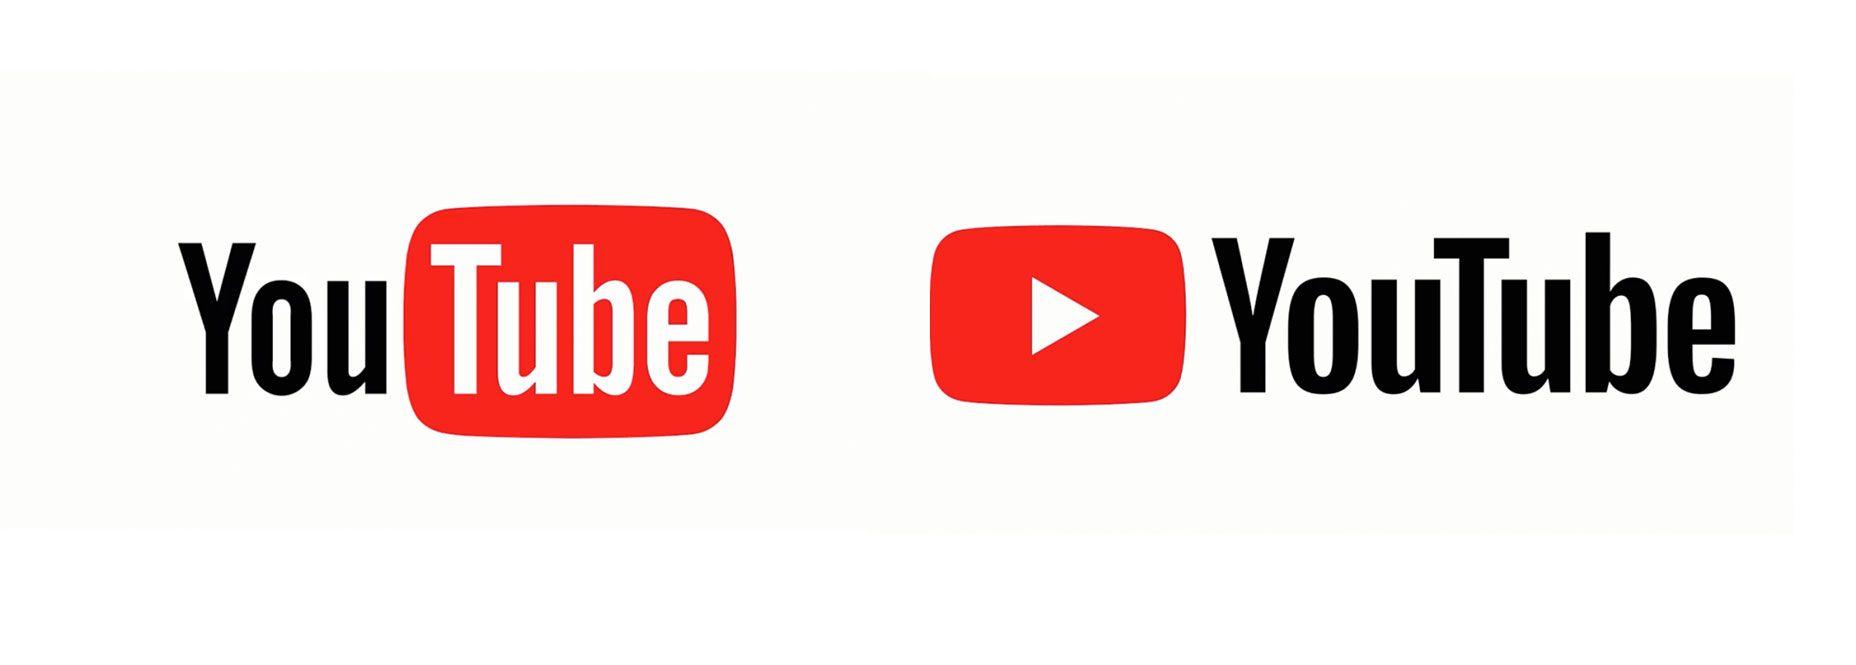 YouTube Old Logo - YouTube Unveils 1st New Logo Since Launch